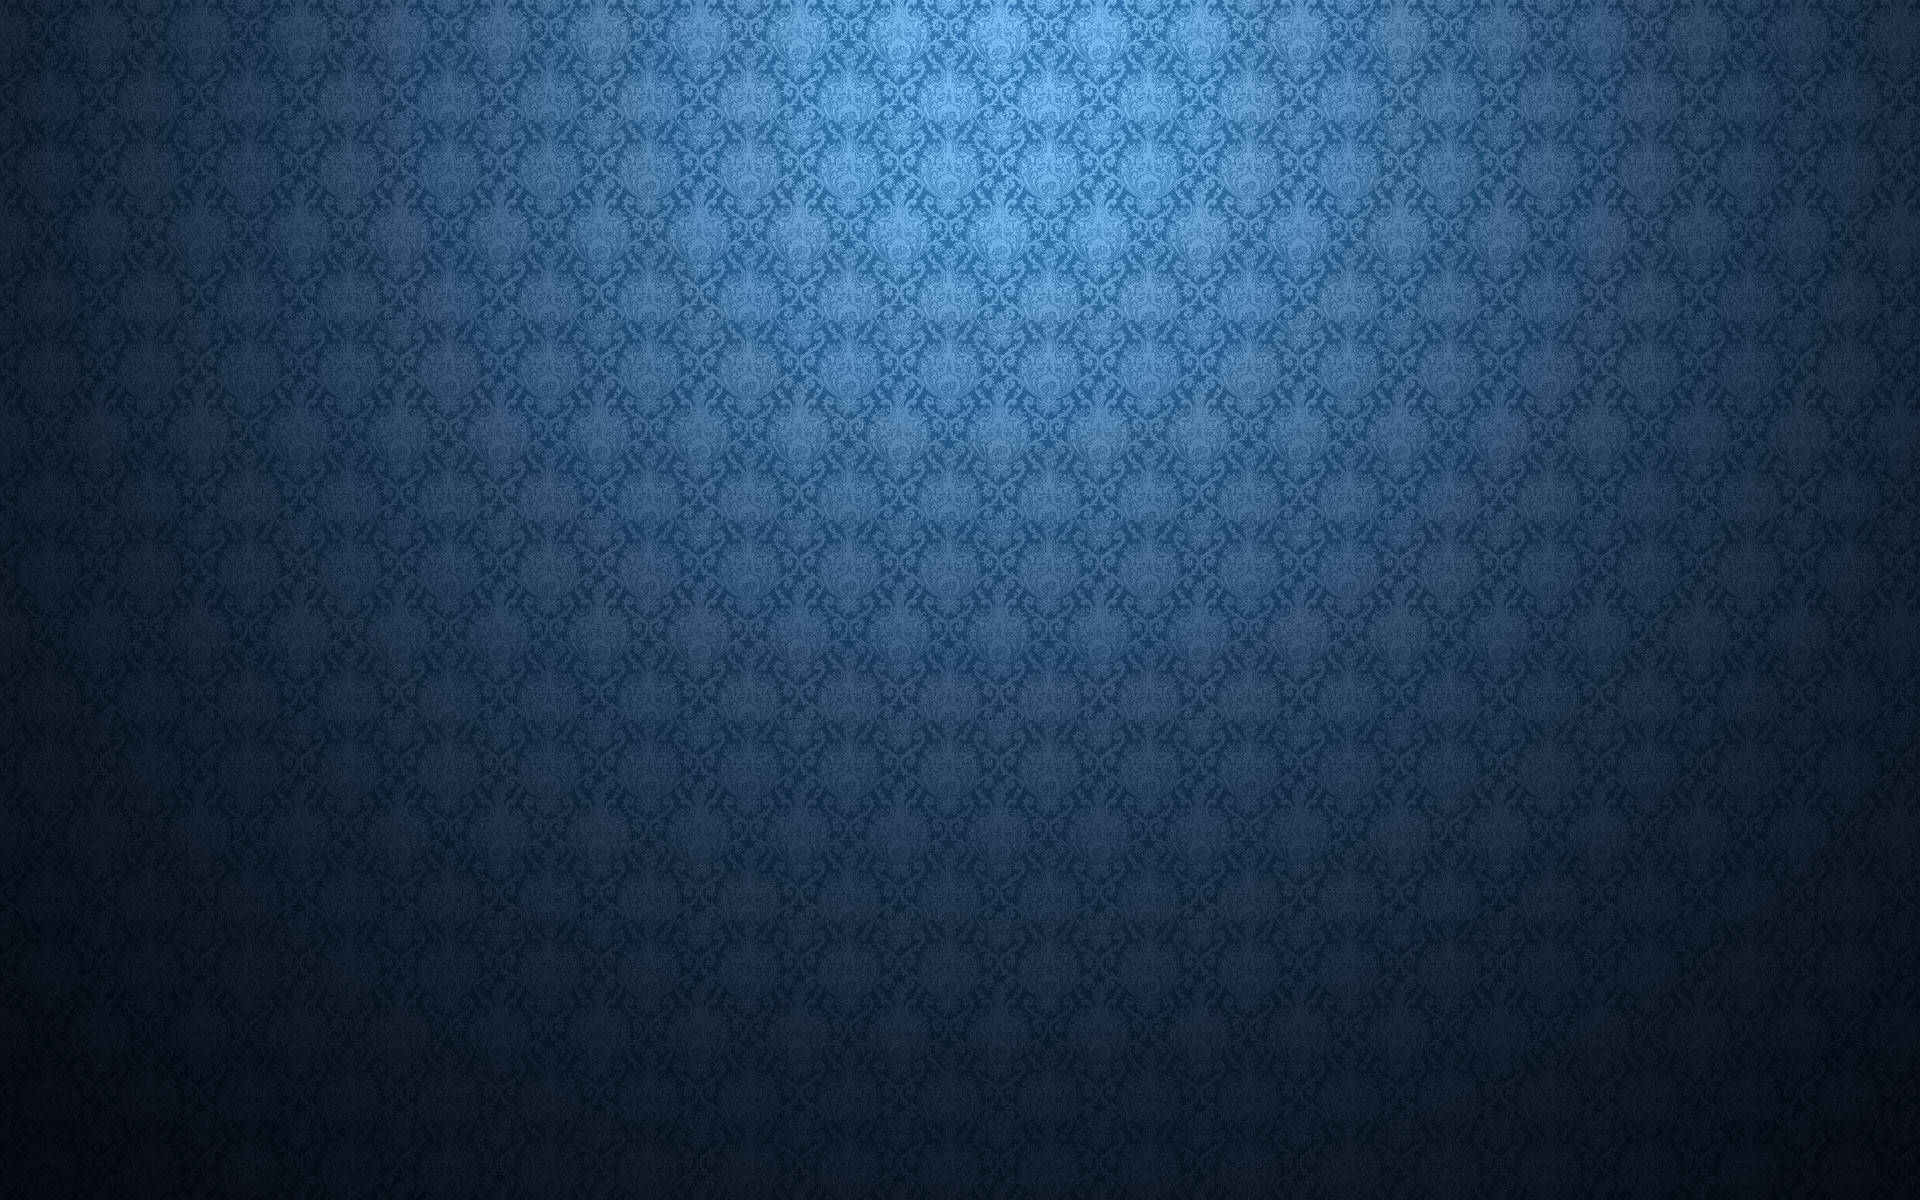 cool blue powerpoint backgrounds